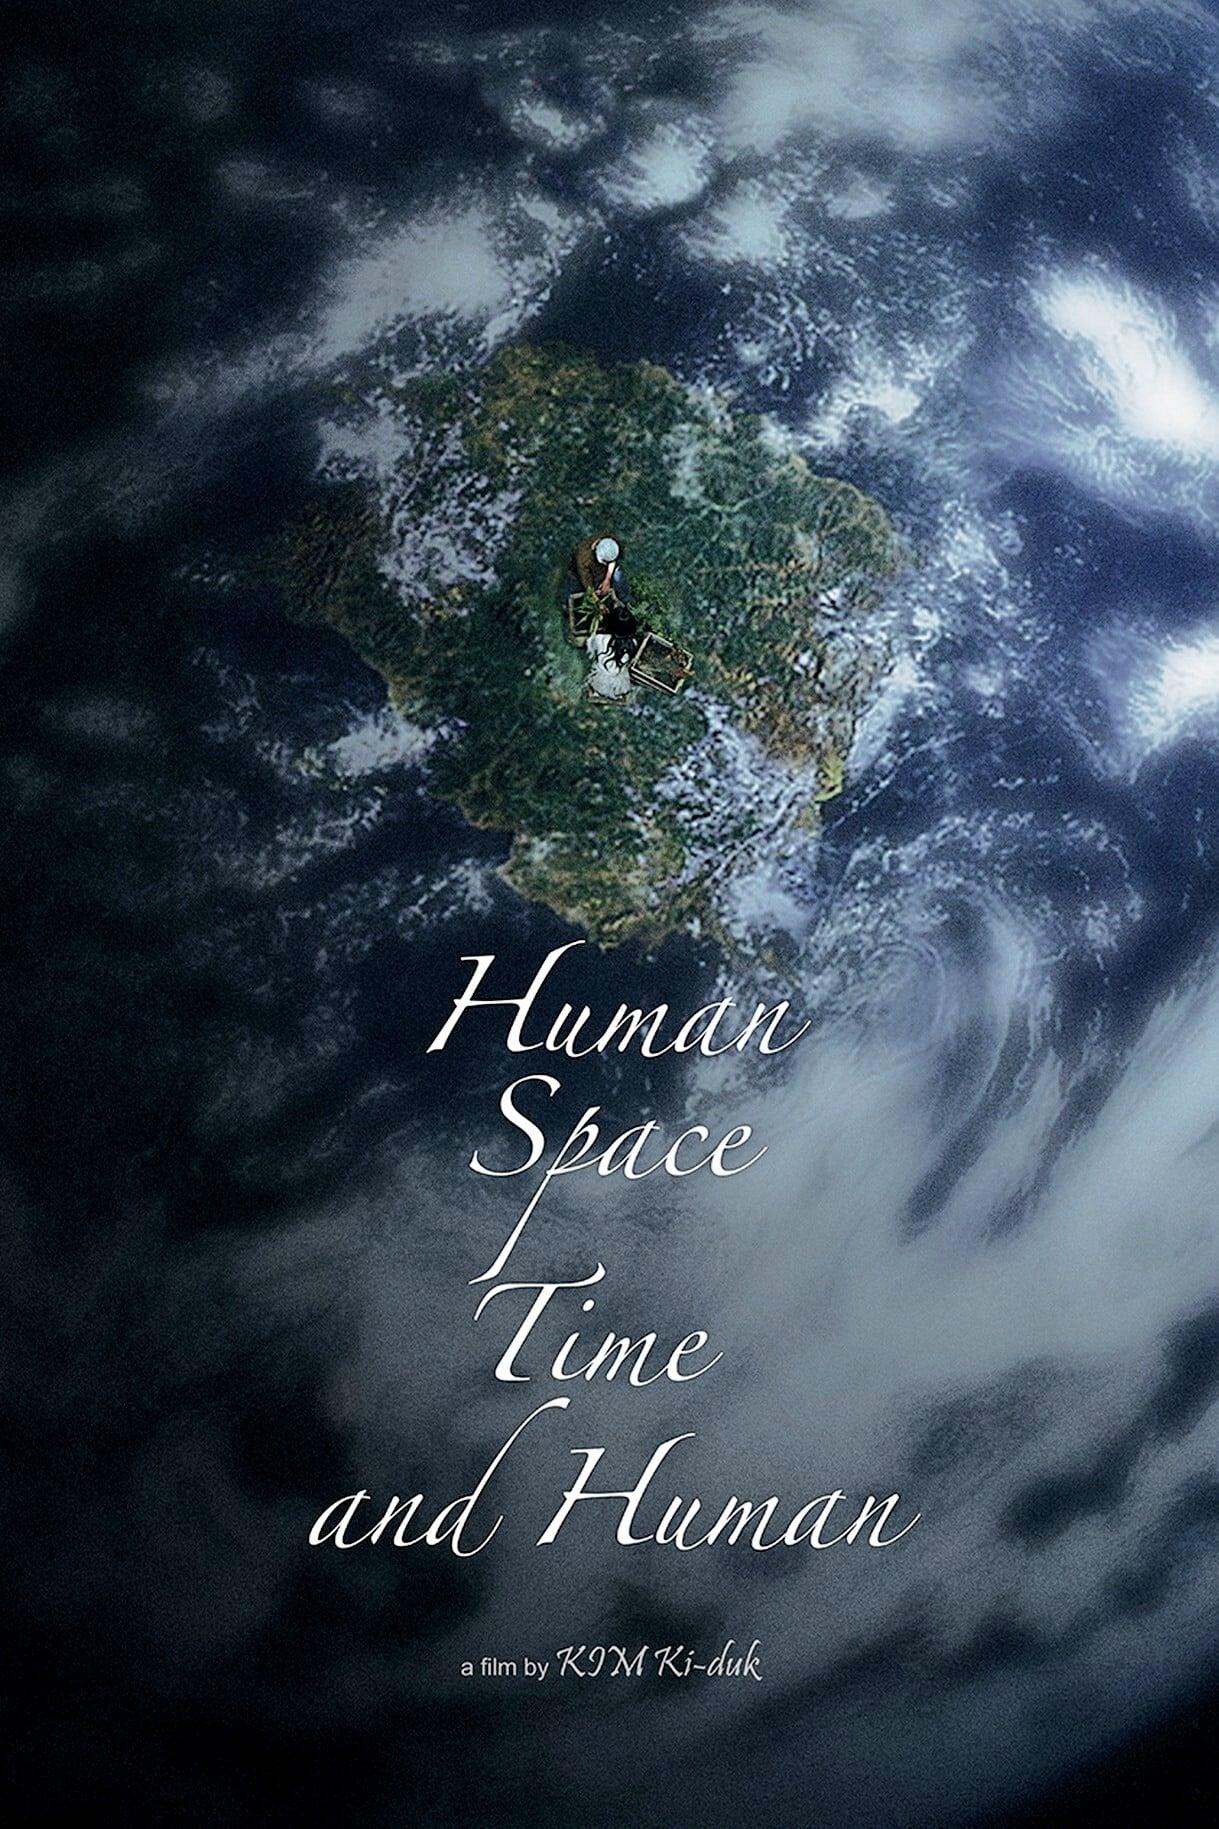 Human, Space, Time and Human poster